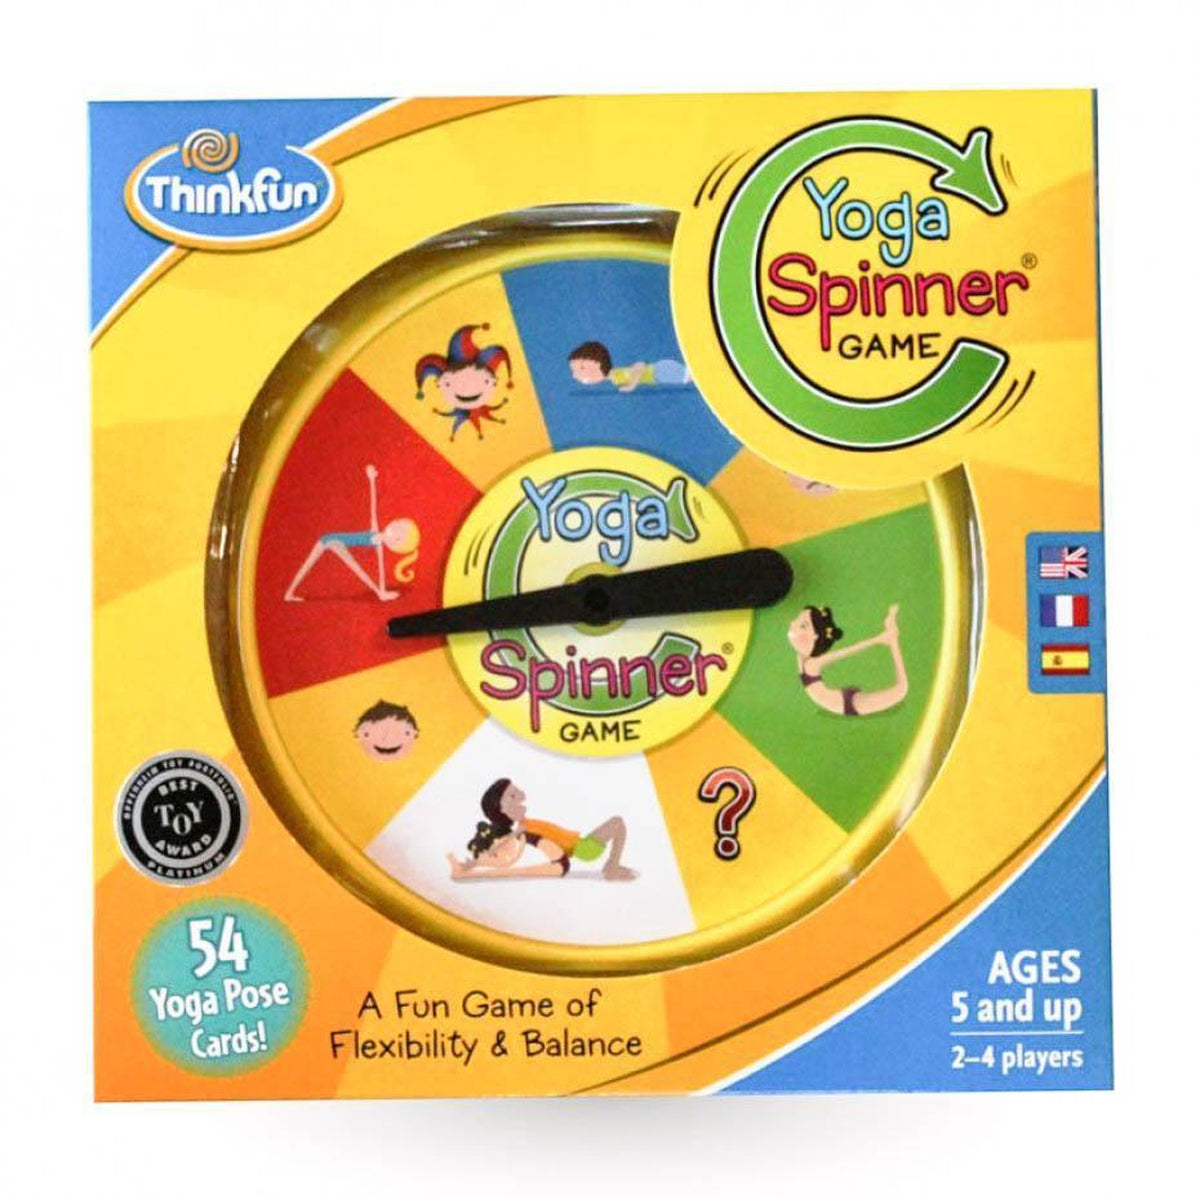 Thinkfun yoga spinner game – Dilly Dally Kids